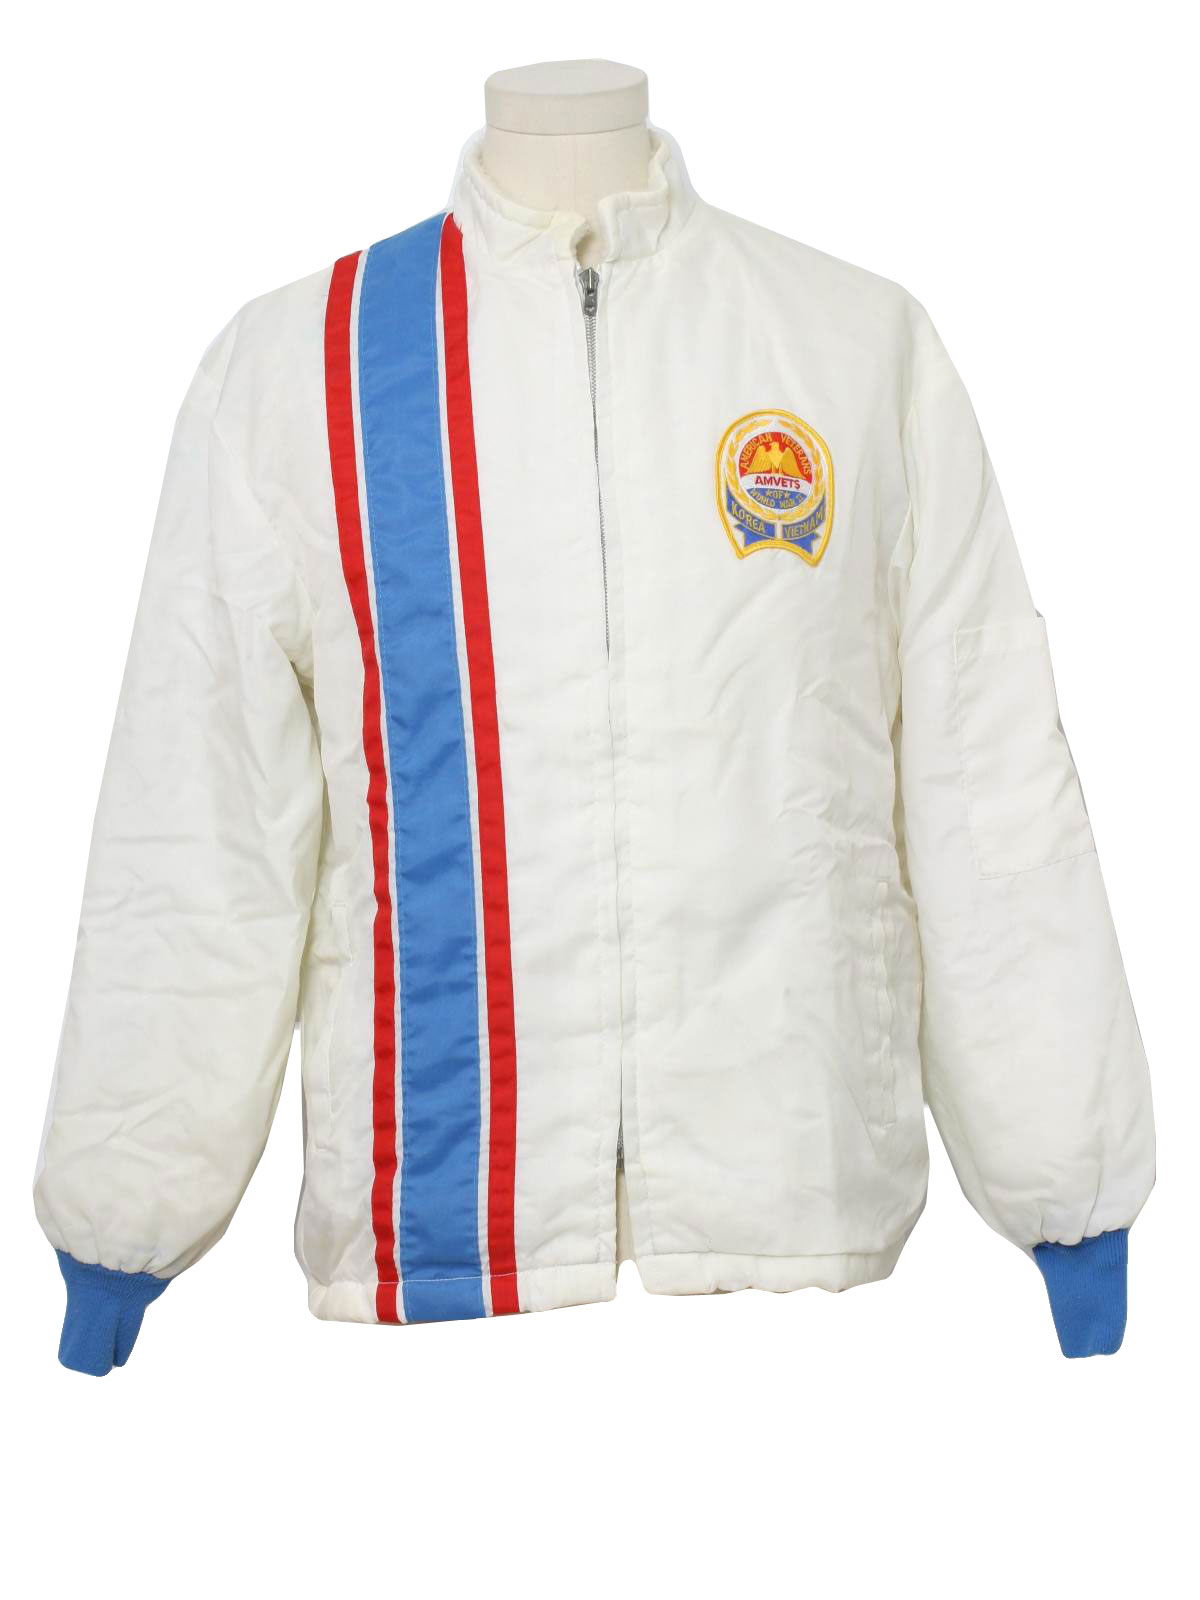 80's Vintage Jacket: 80s -no label- Mens white, red and blue nylon ...